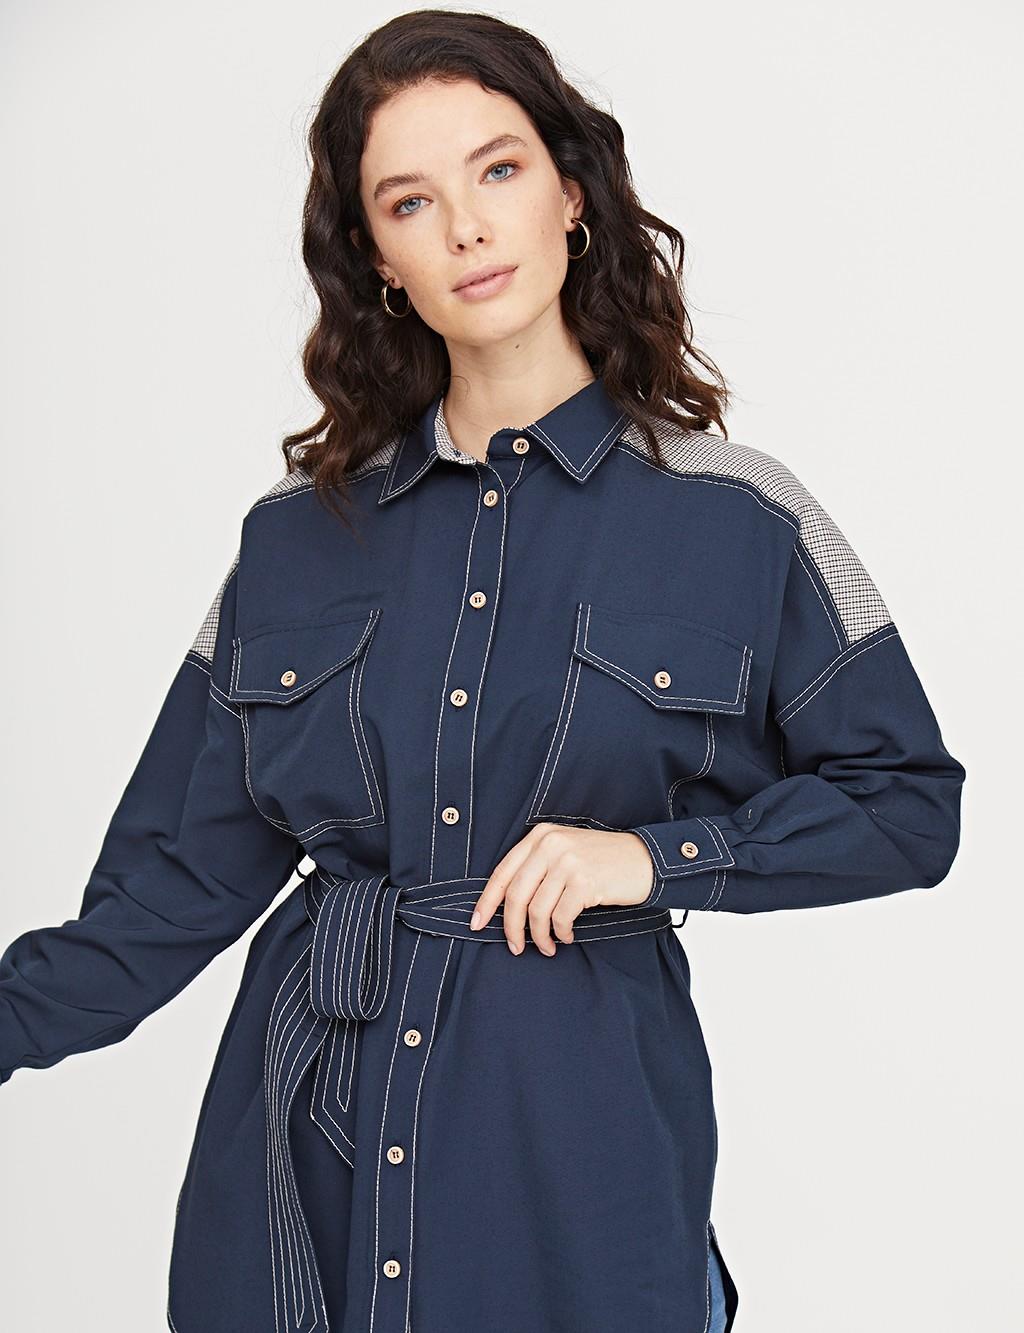 Belted Tunic With Double Pocket B21 21297 Navy